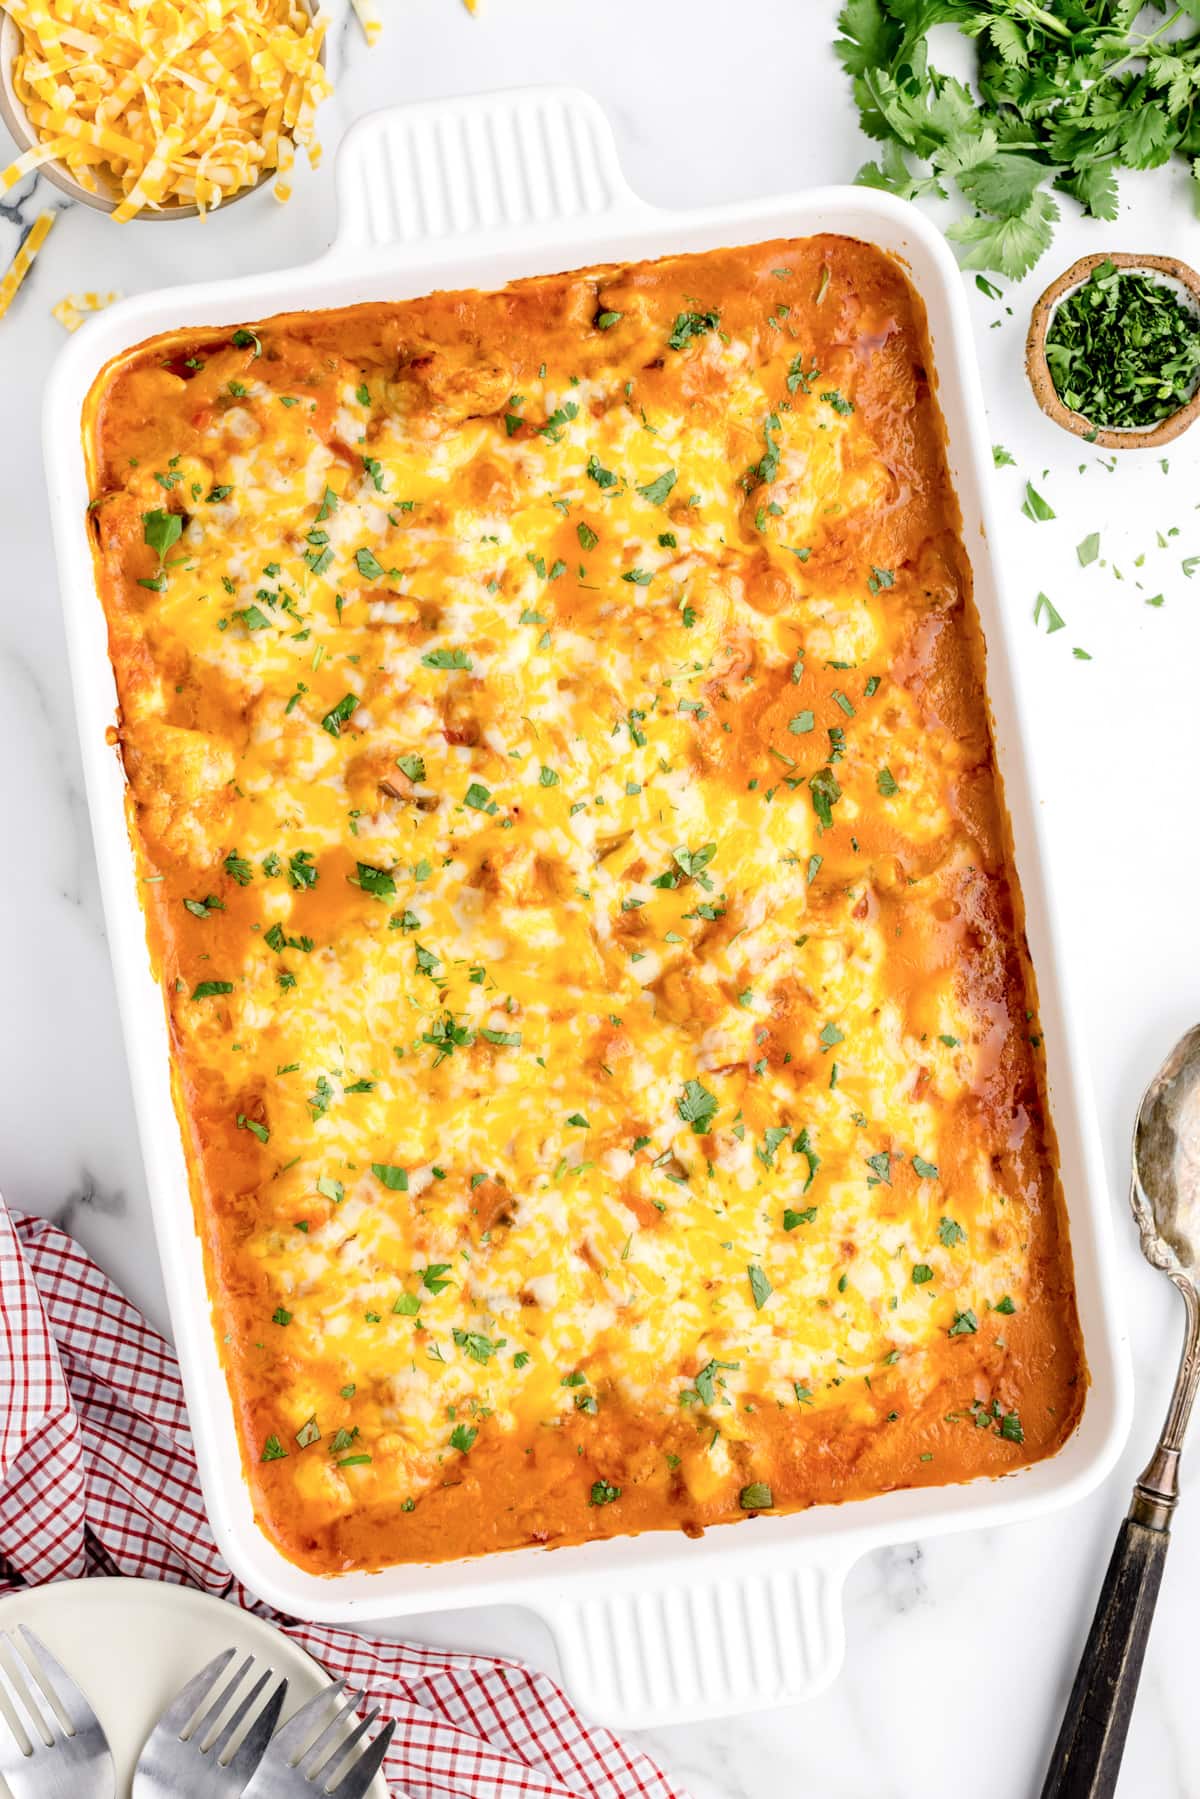 Top view of a Mexican casserole baked and cheesy.